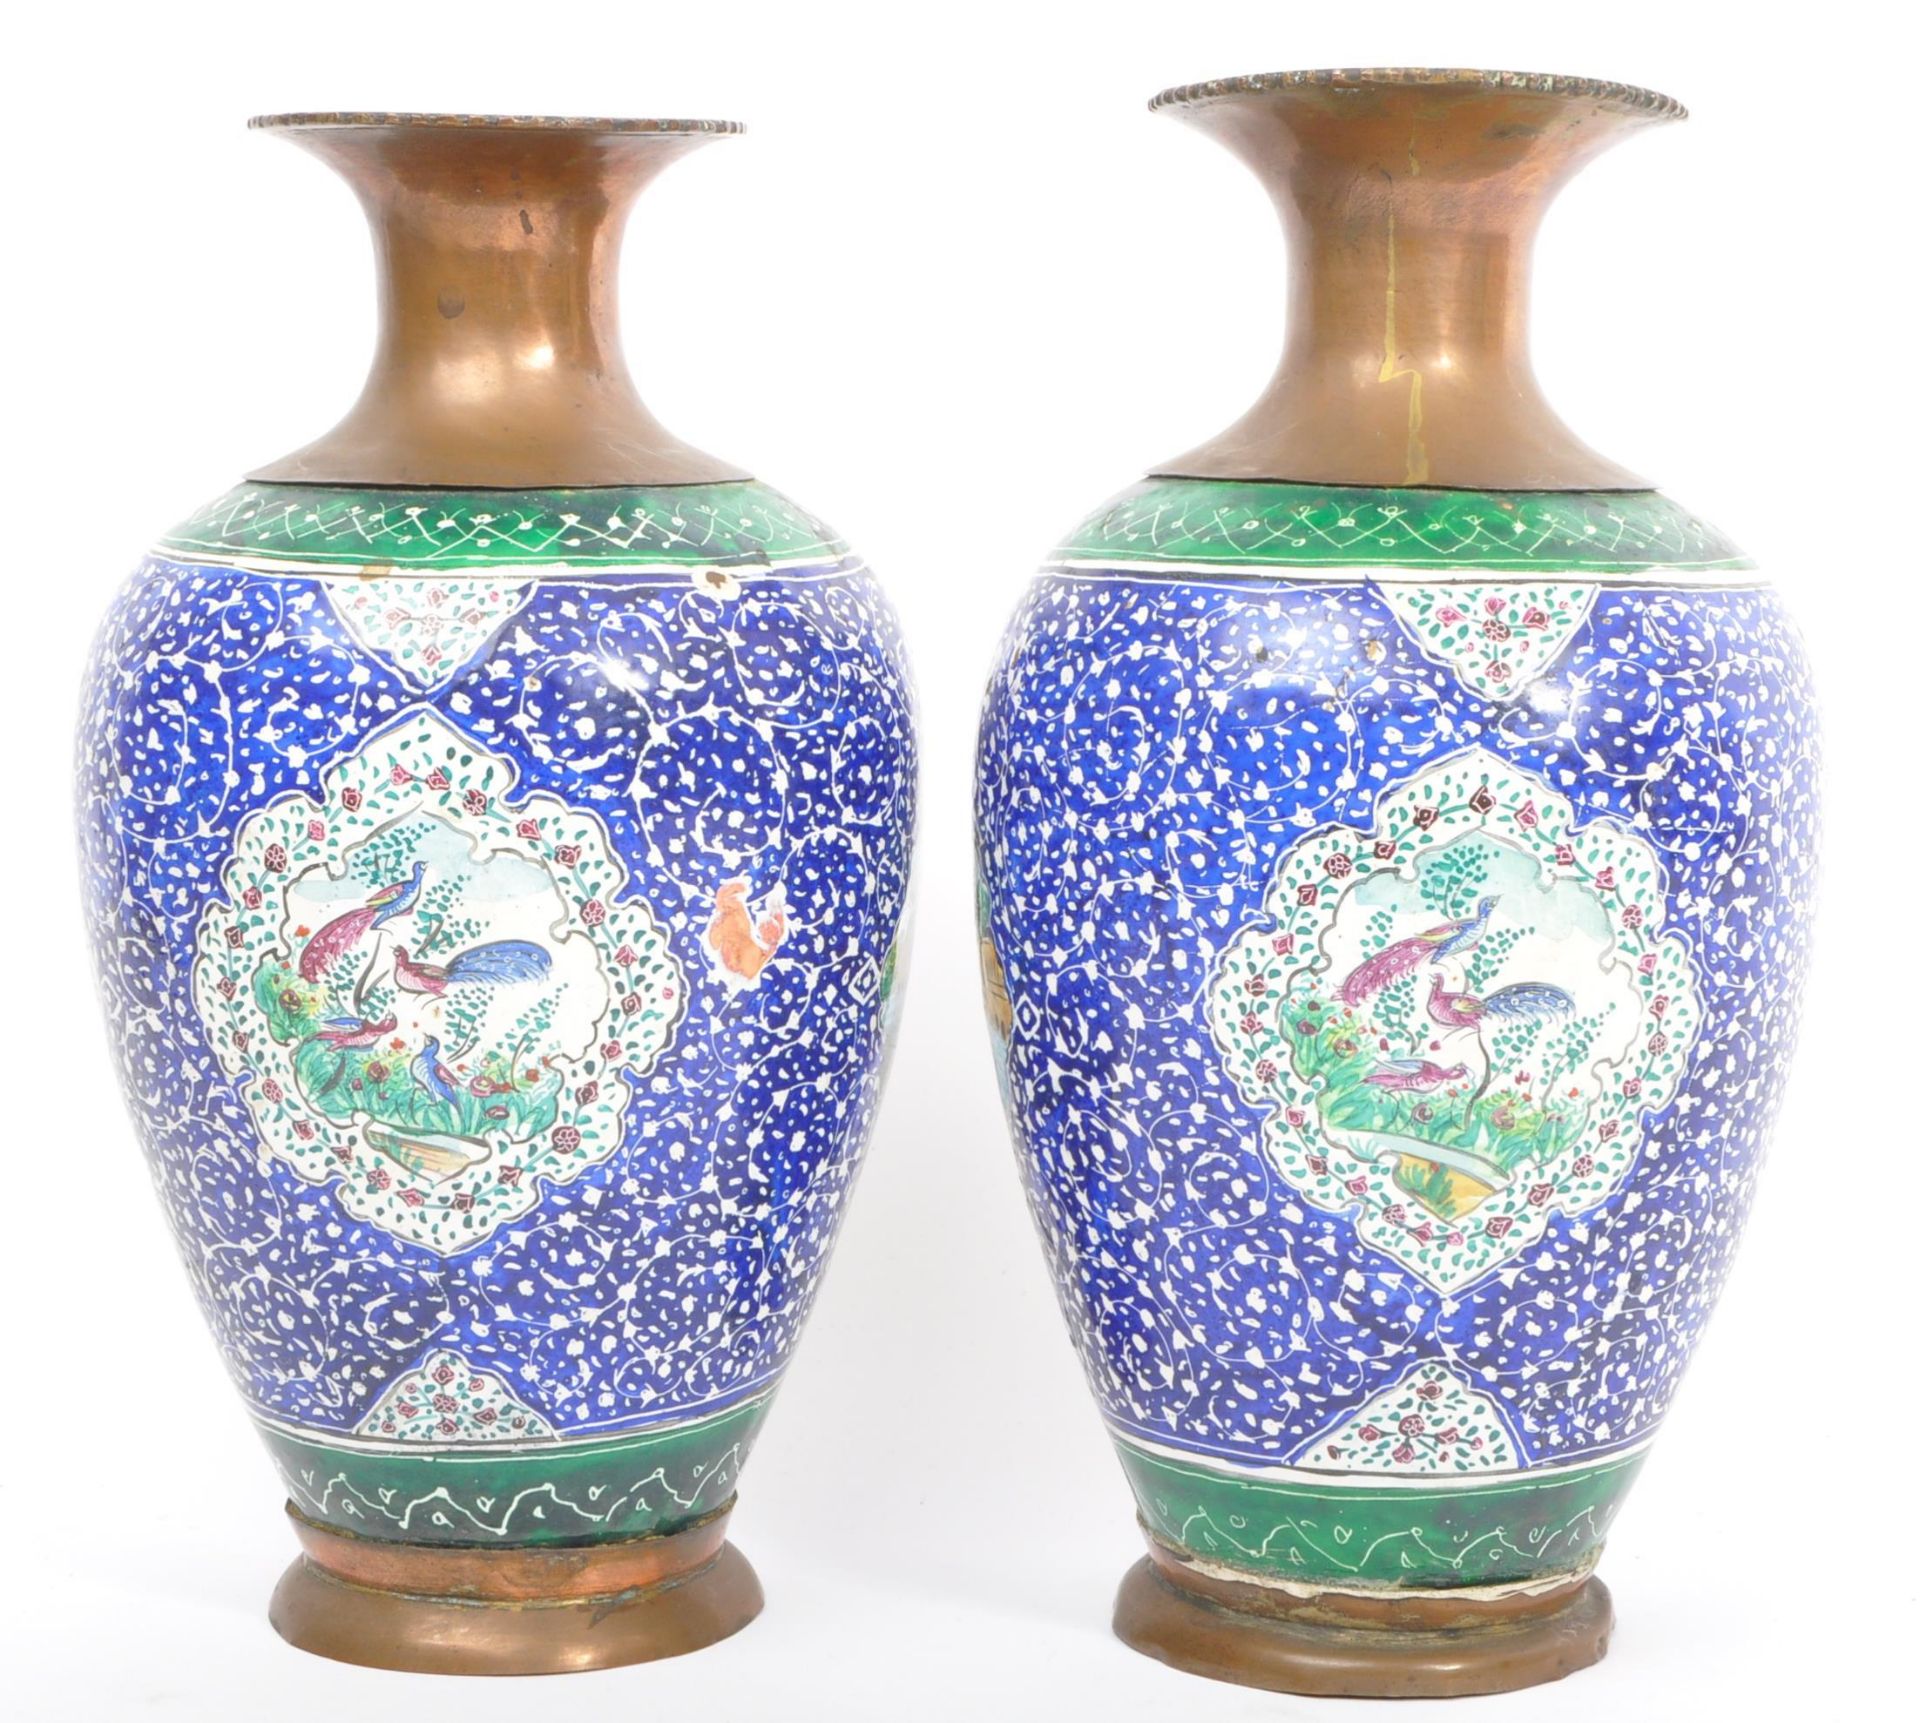 PAIR OF EARLY 20TH CENTURY COPPER & ENAMEL HAND PAINTED VASES